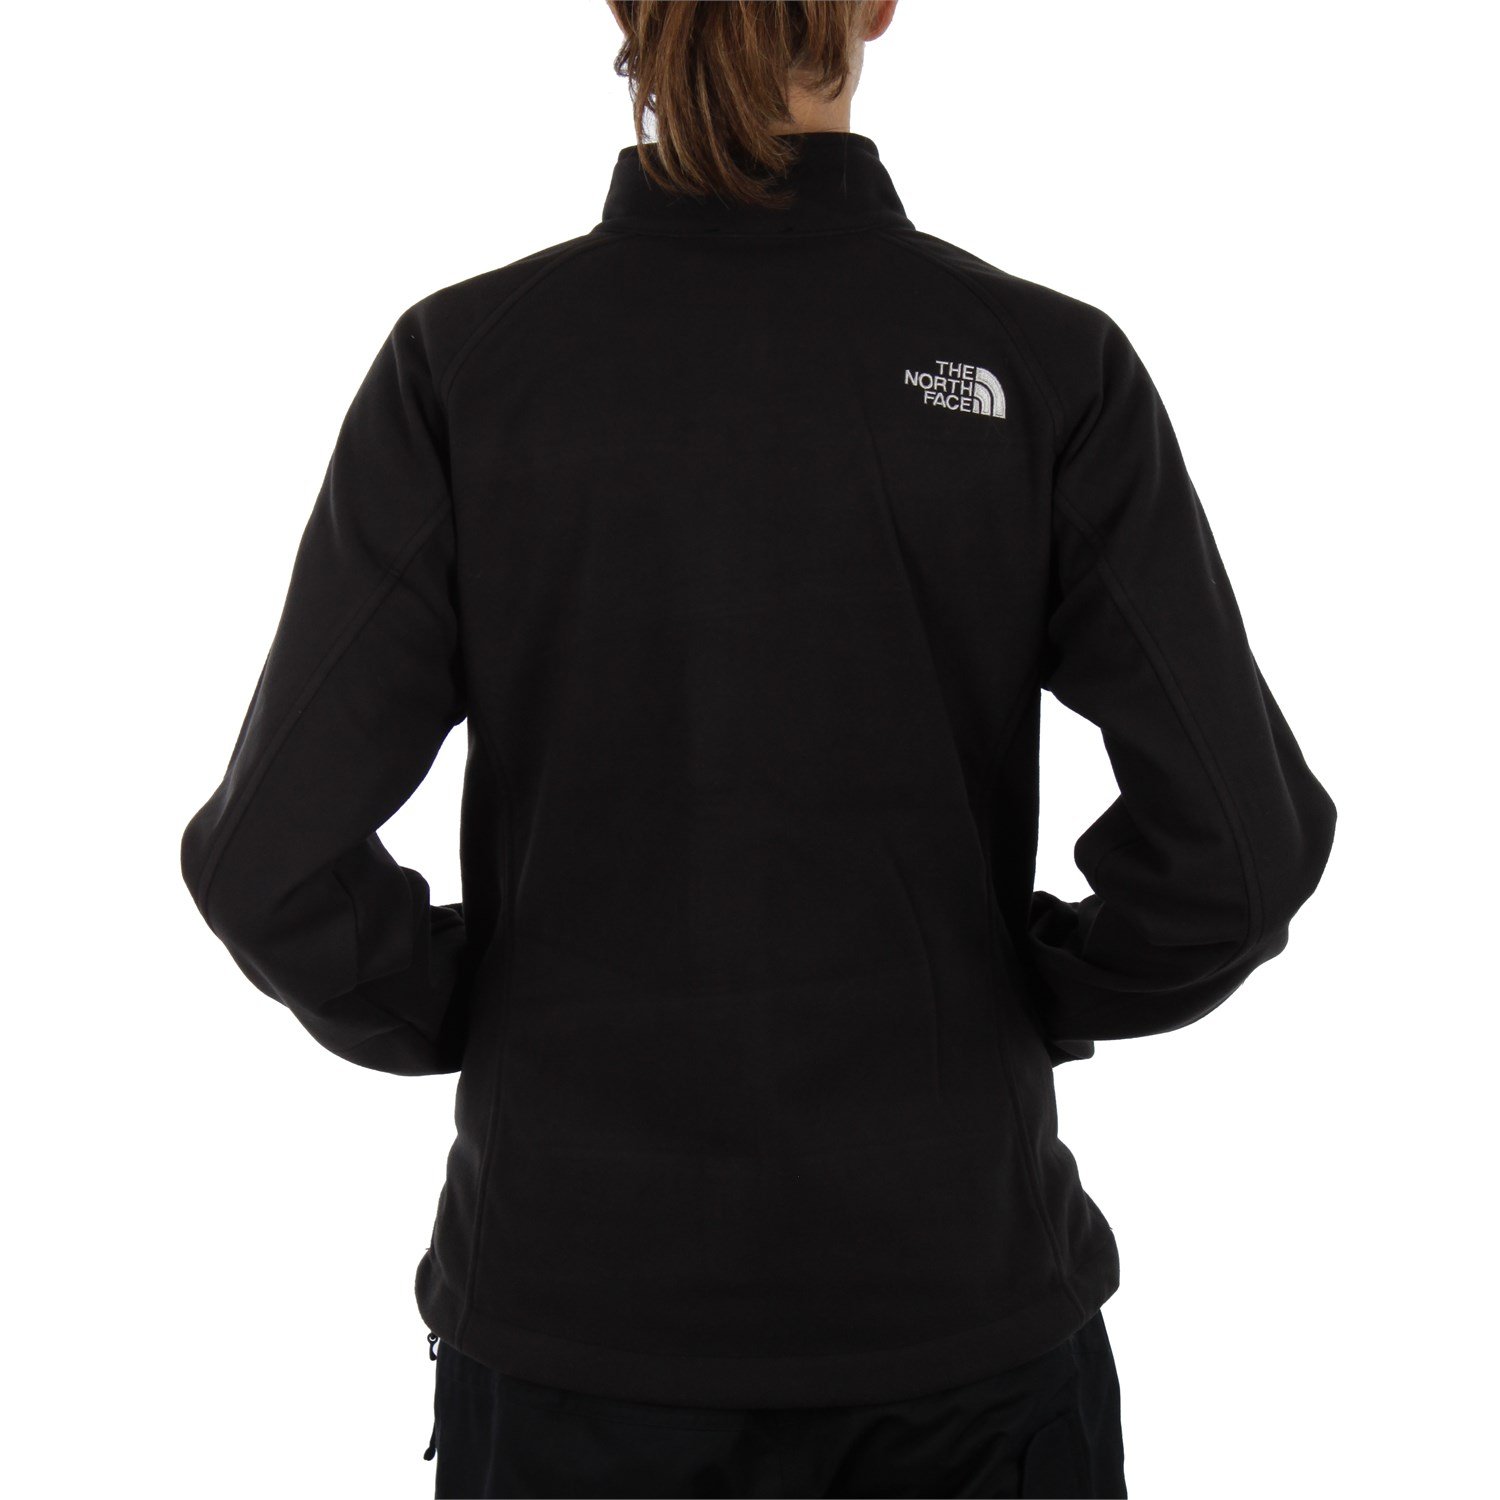 The North Face Windwall 1 Jacket - Women's